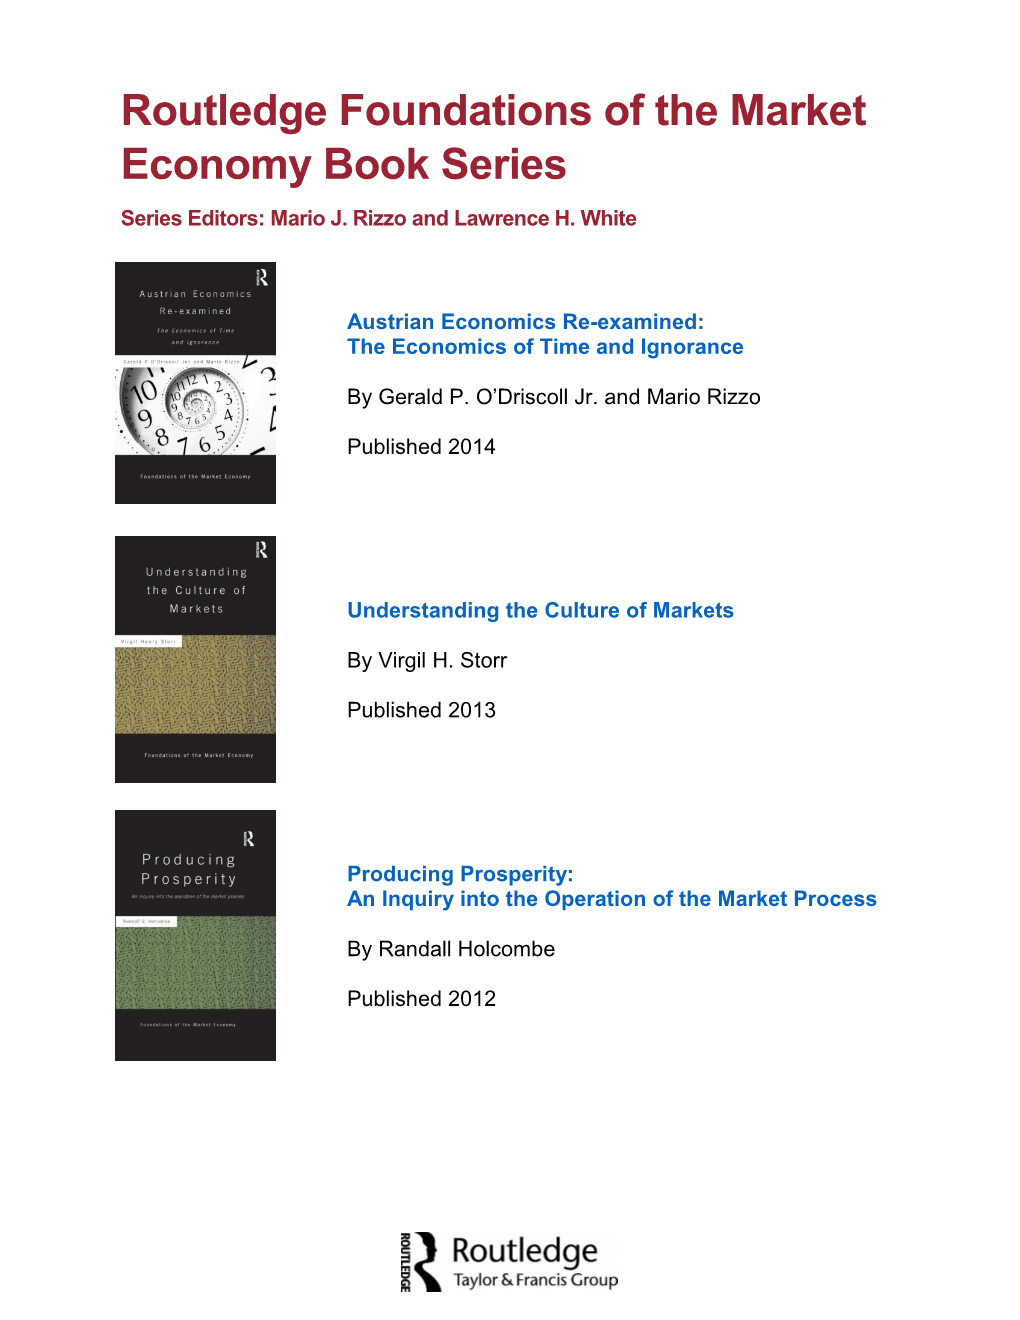 Routledge Foundations of the Market Economy Book Series Series Editors: Mario J